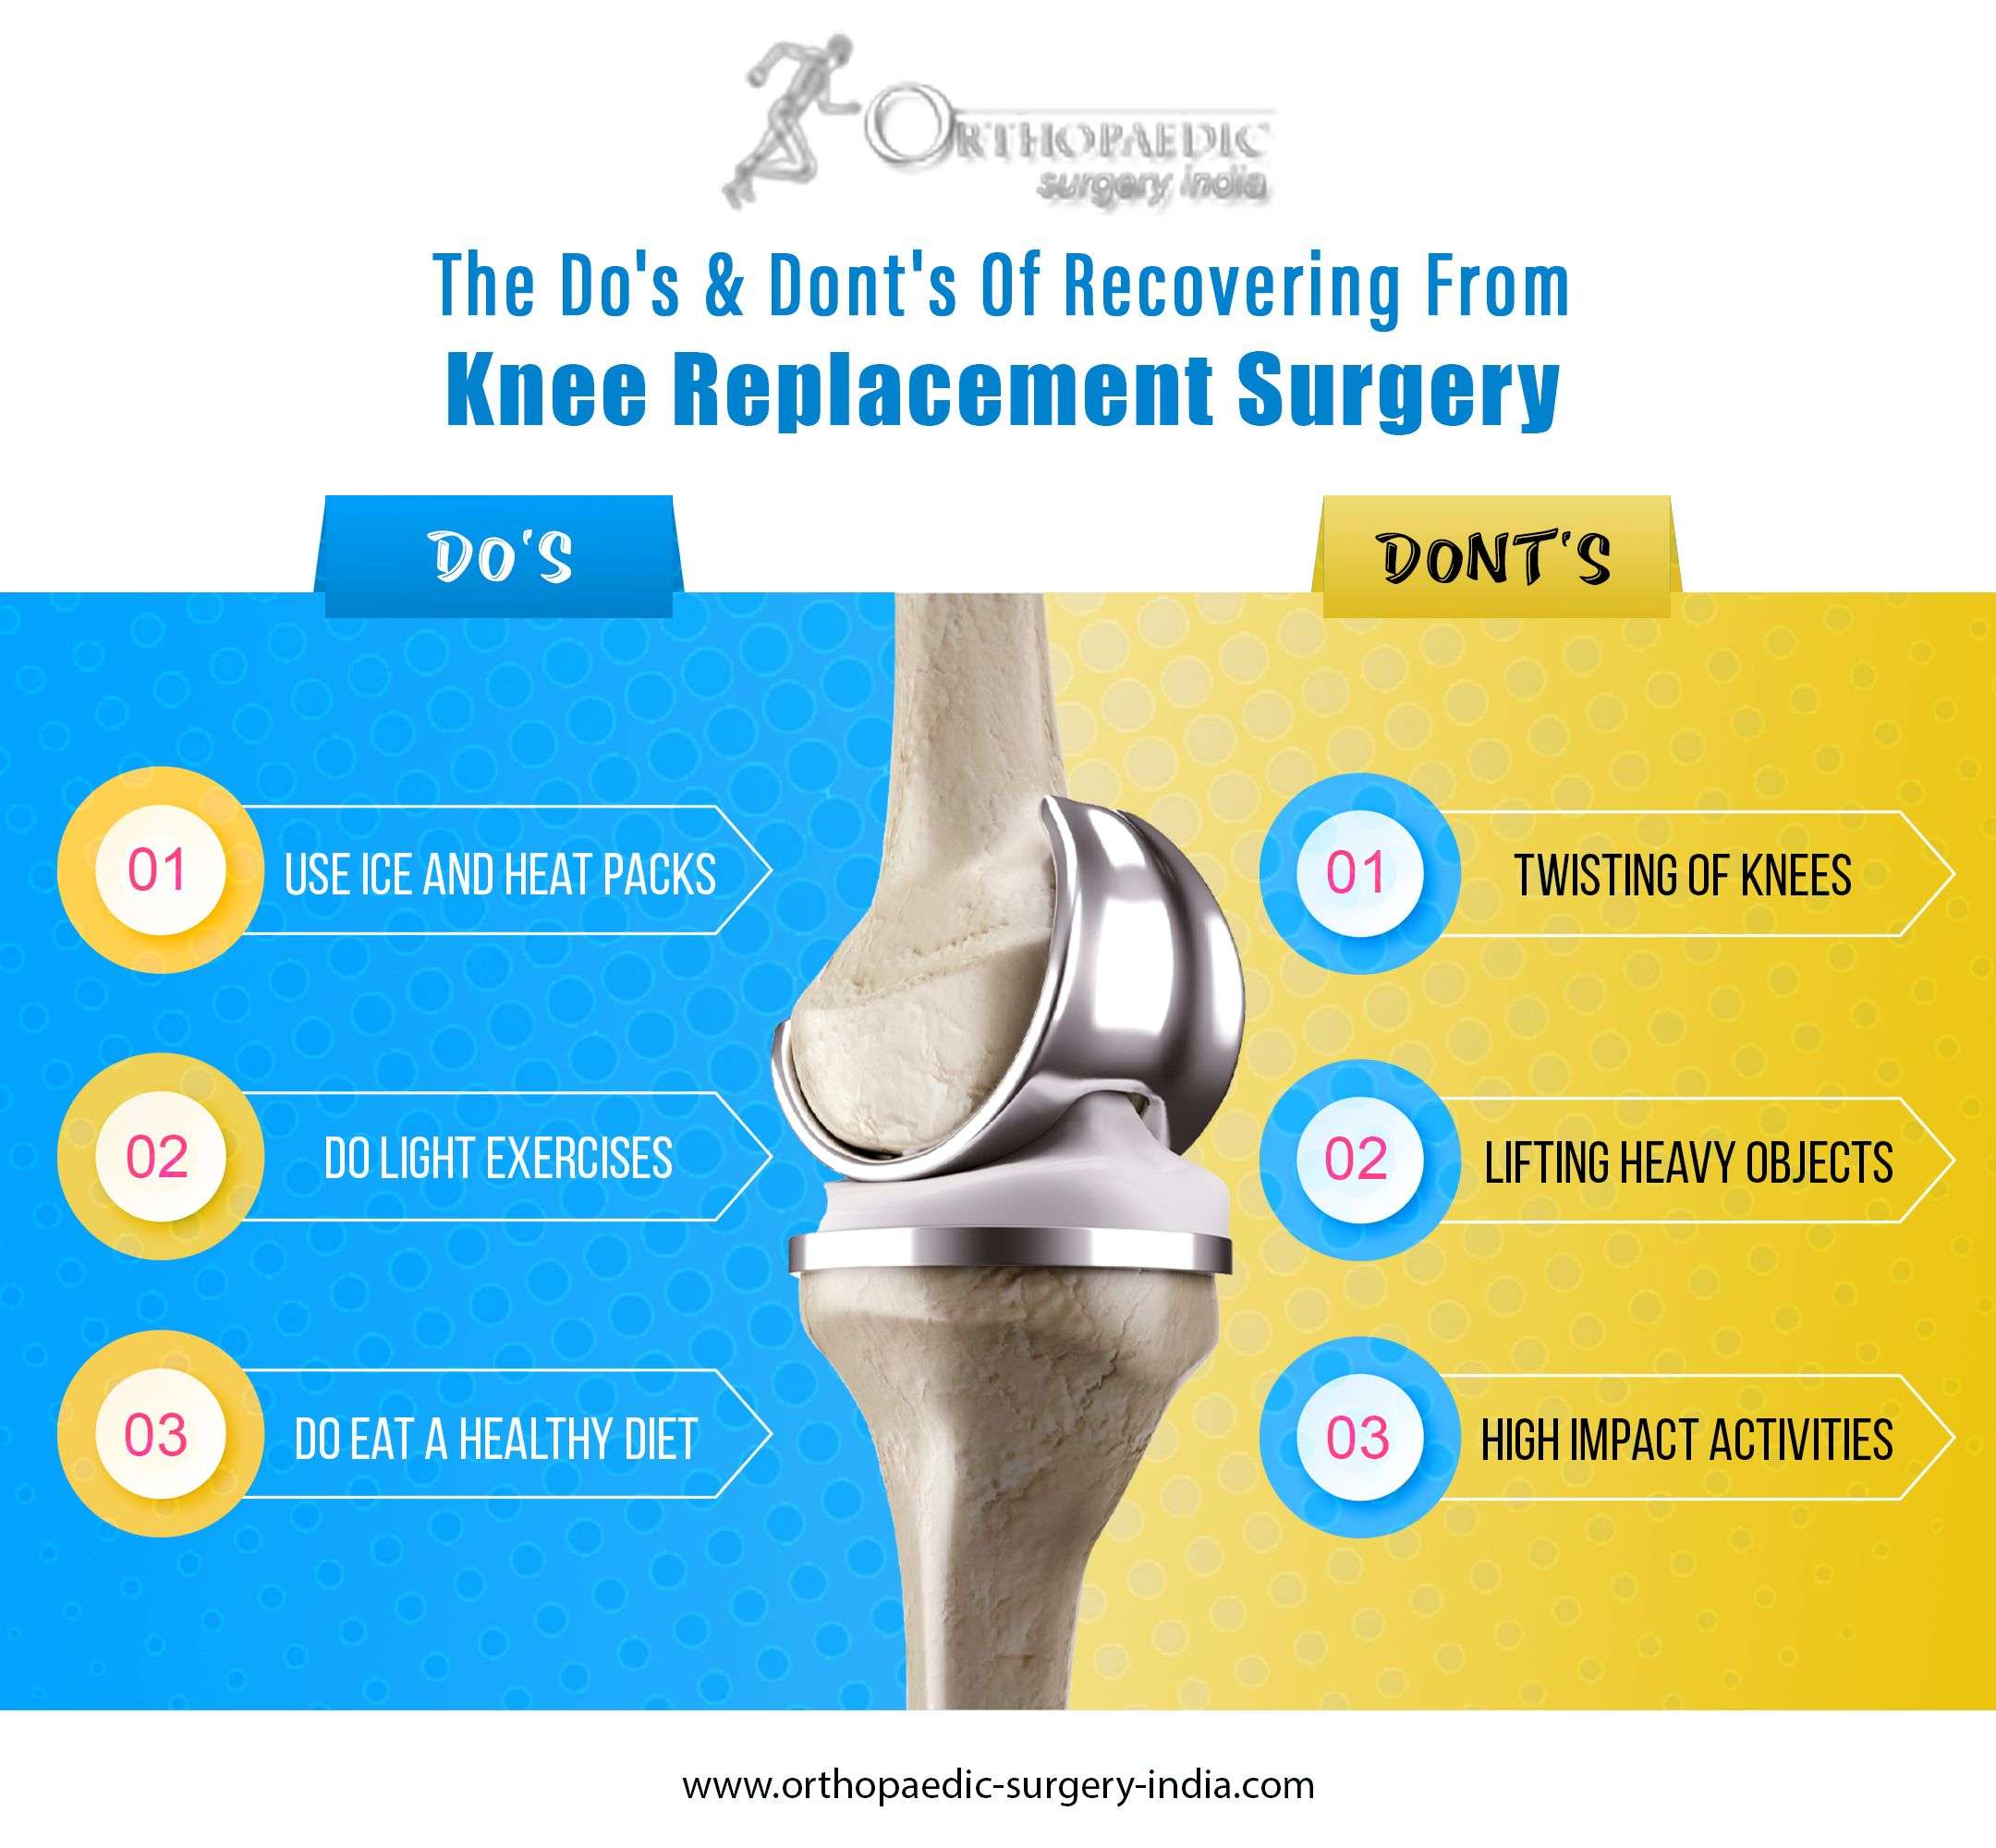 The Knee replacement surgery restores a damaged, worn, or diseased knee ...